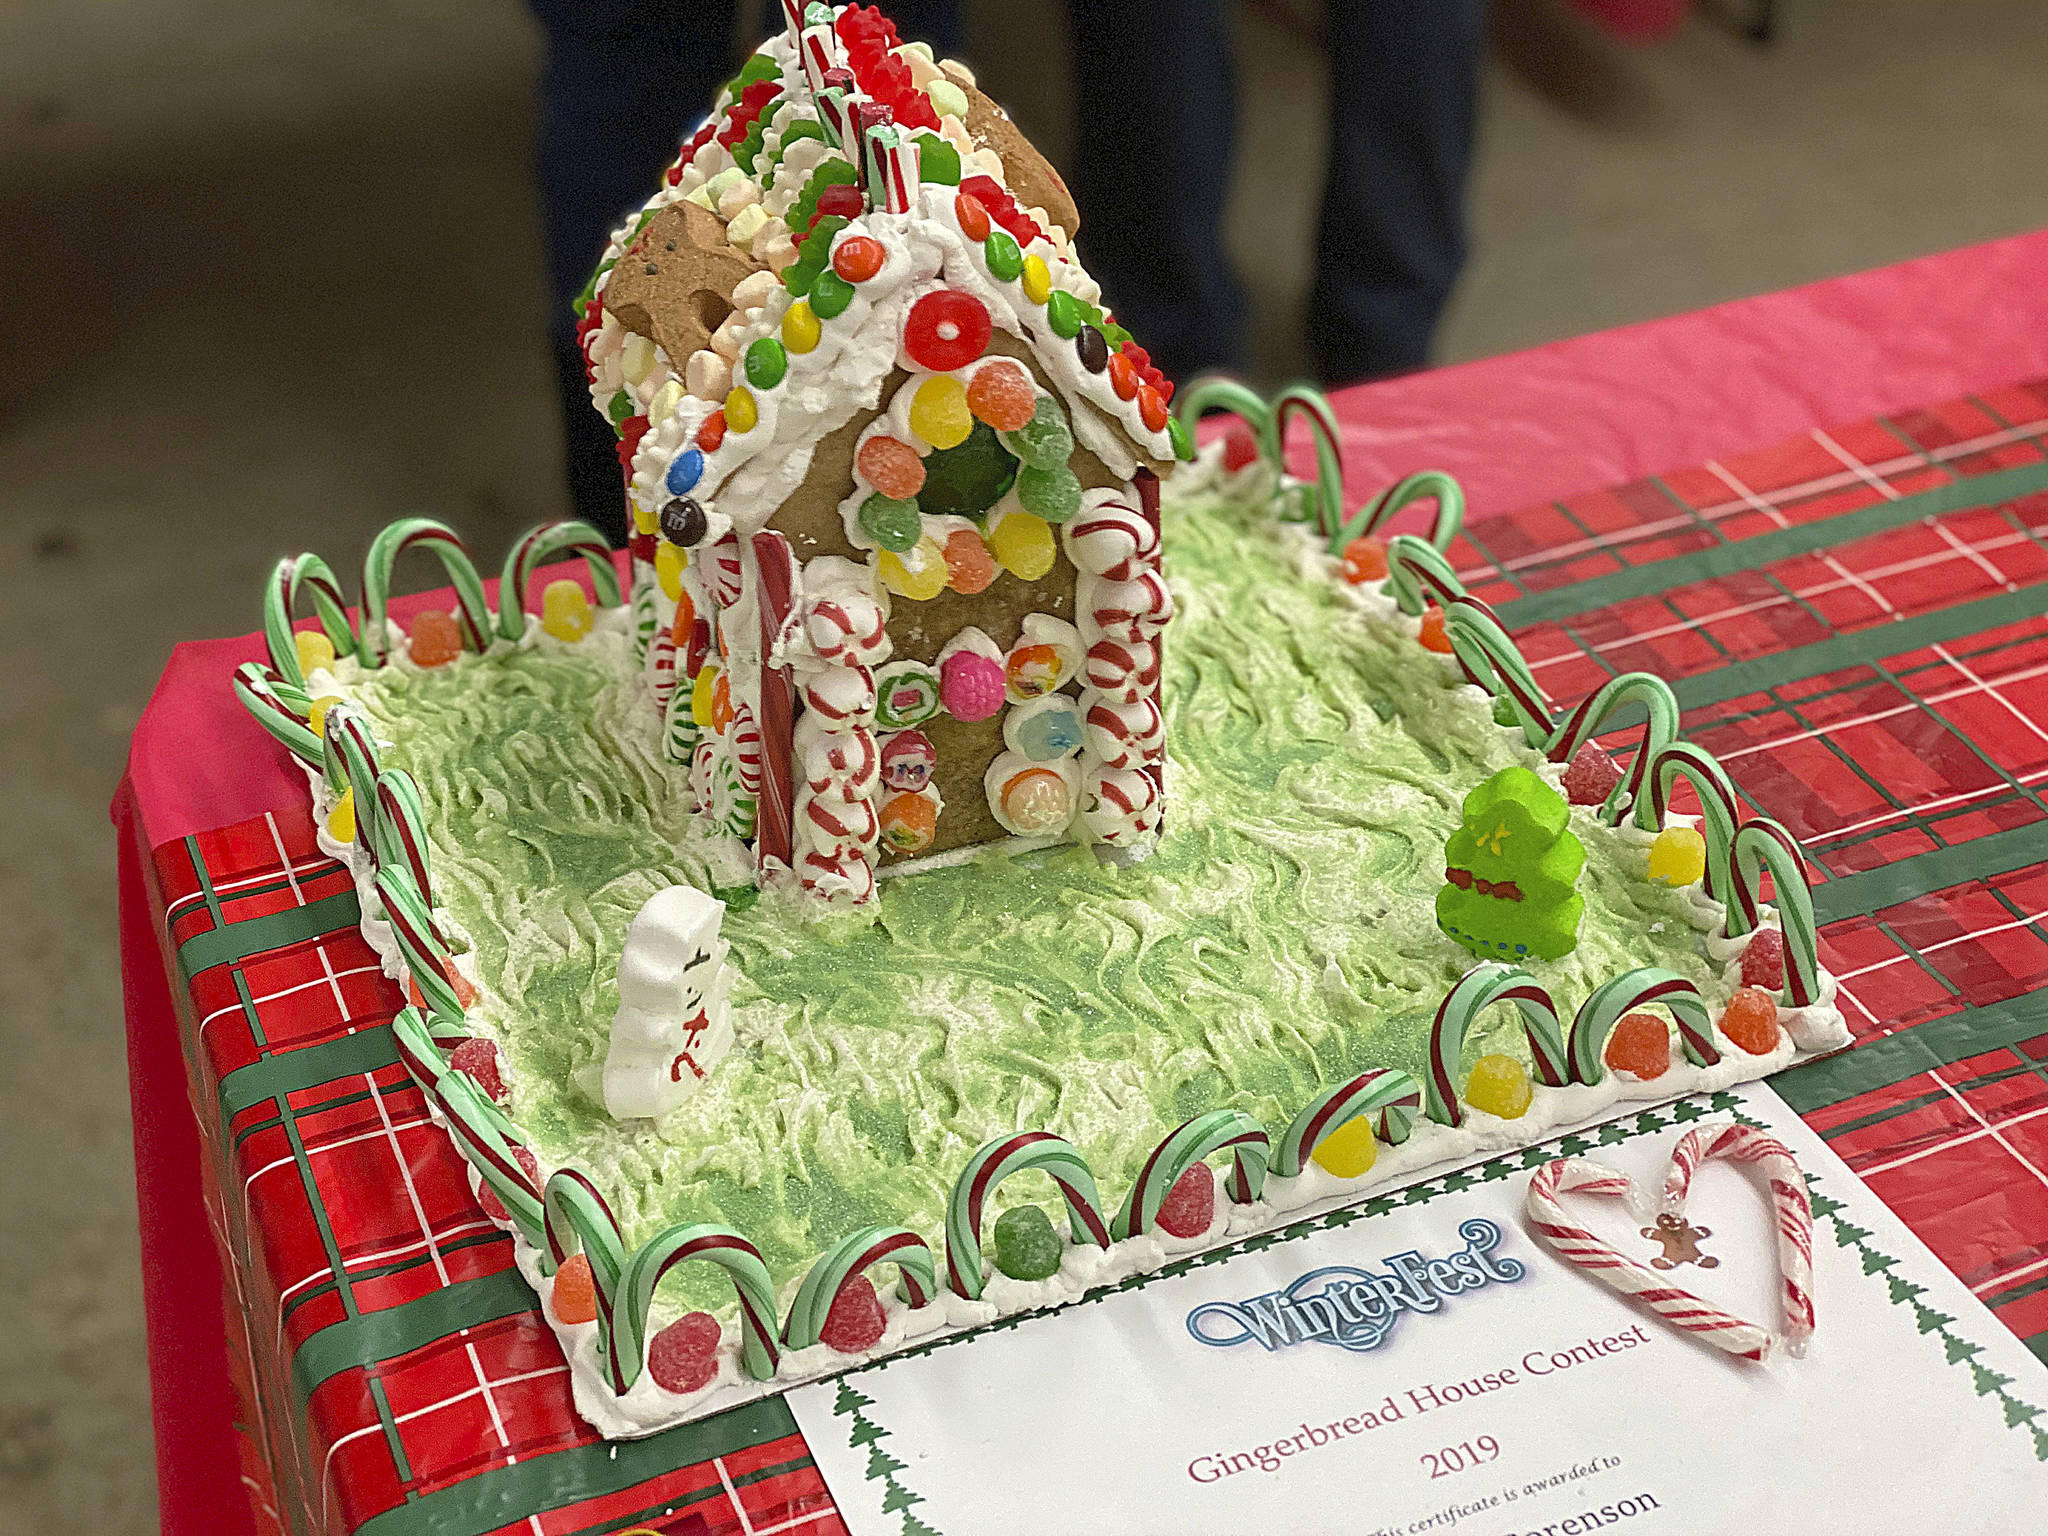 Eighty gingerbread house building kits were purchased and donated by a couple of local benefactors for those who wish to compete. The south-side Swanson’s and the original downtown location of the Tinder Box will be handing them out starting Nov. 17. (Photo by Rick Moyer)